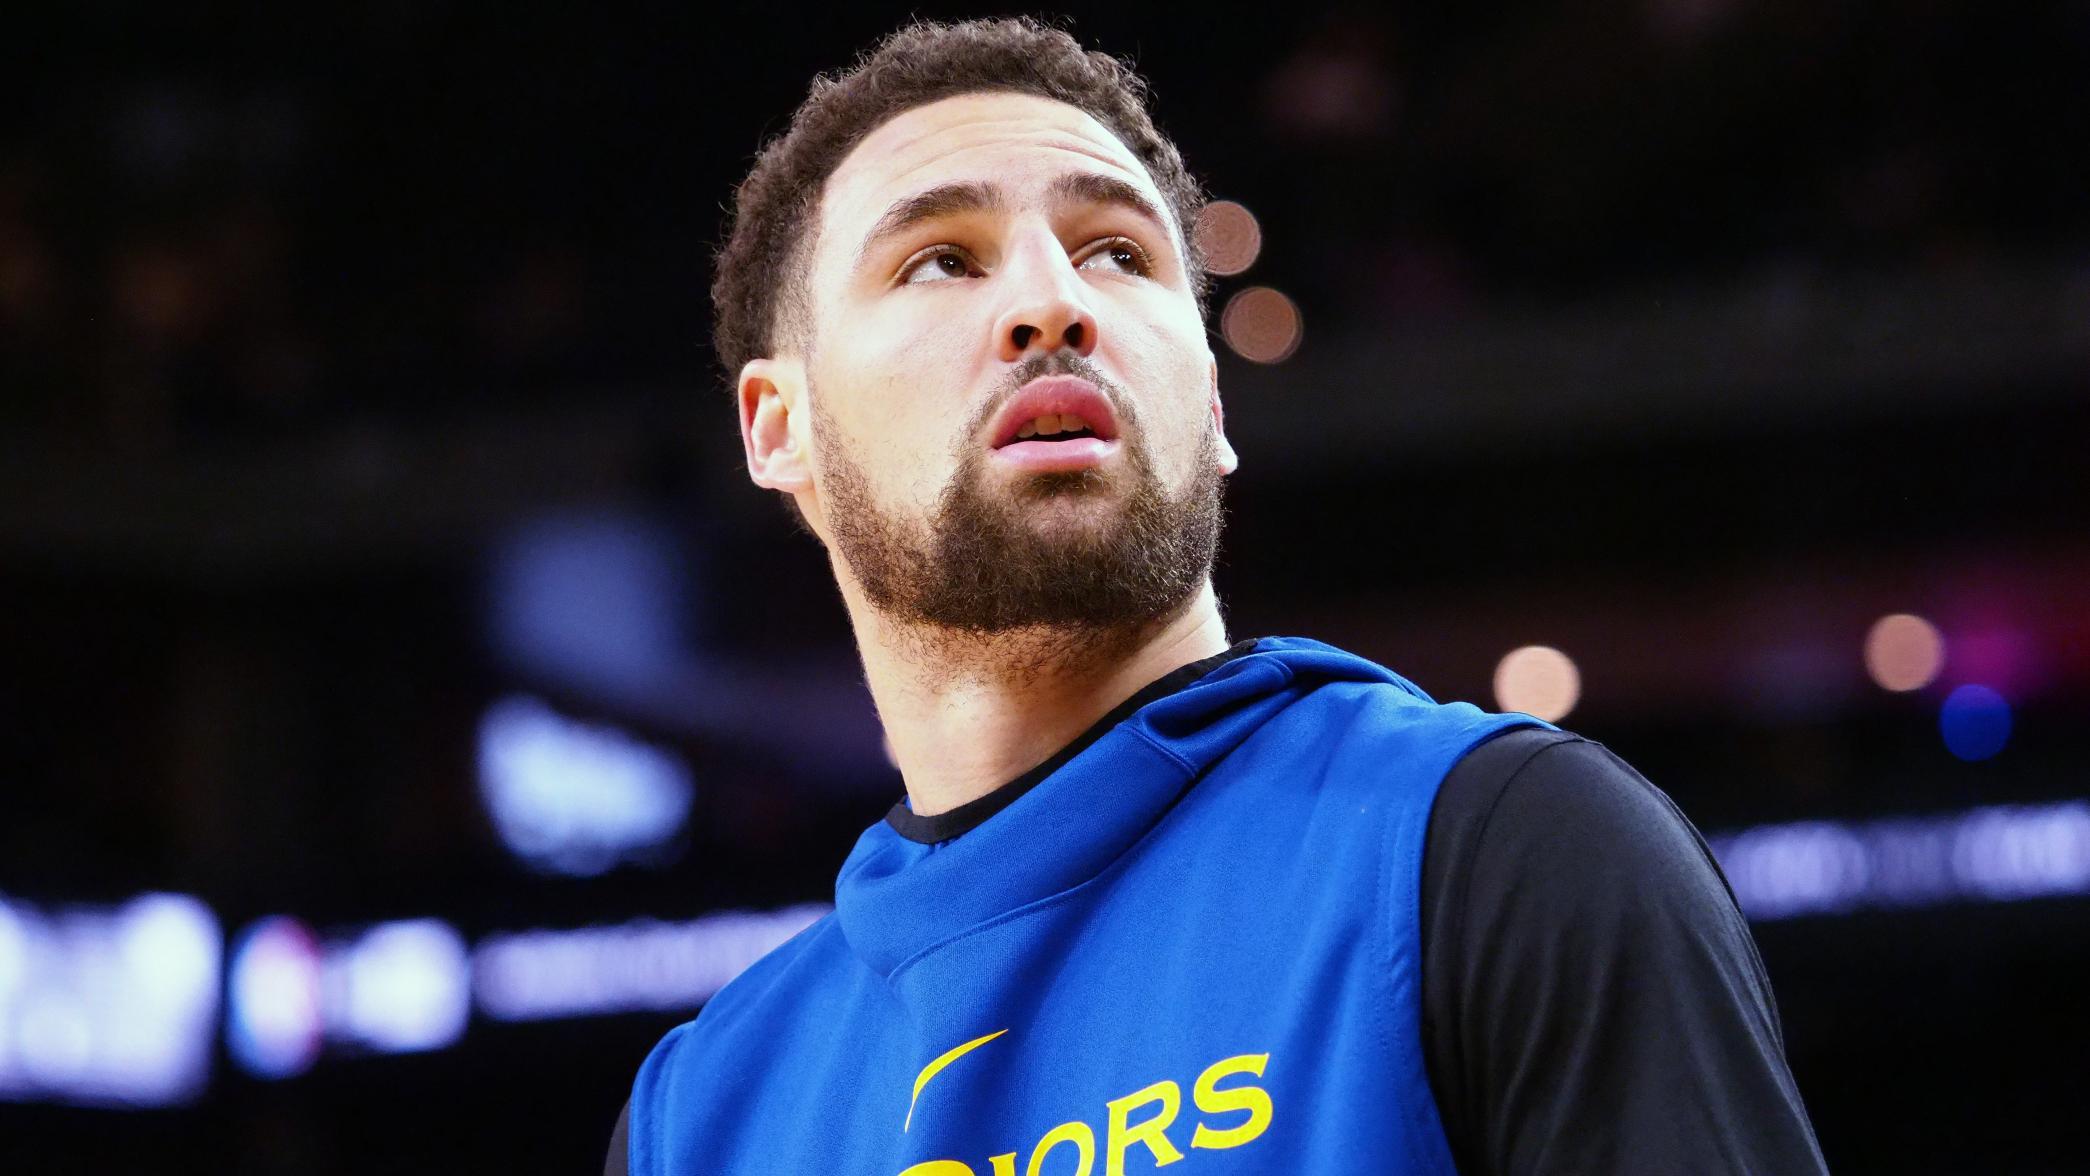 Klay Thompson to return for Game 4 of NBA Finals